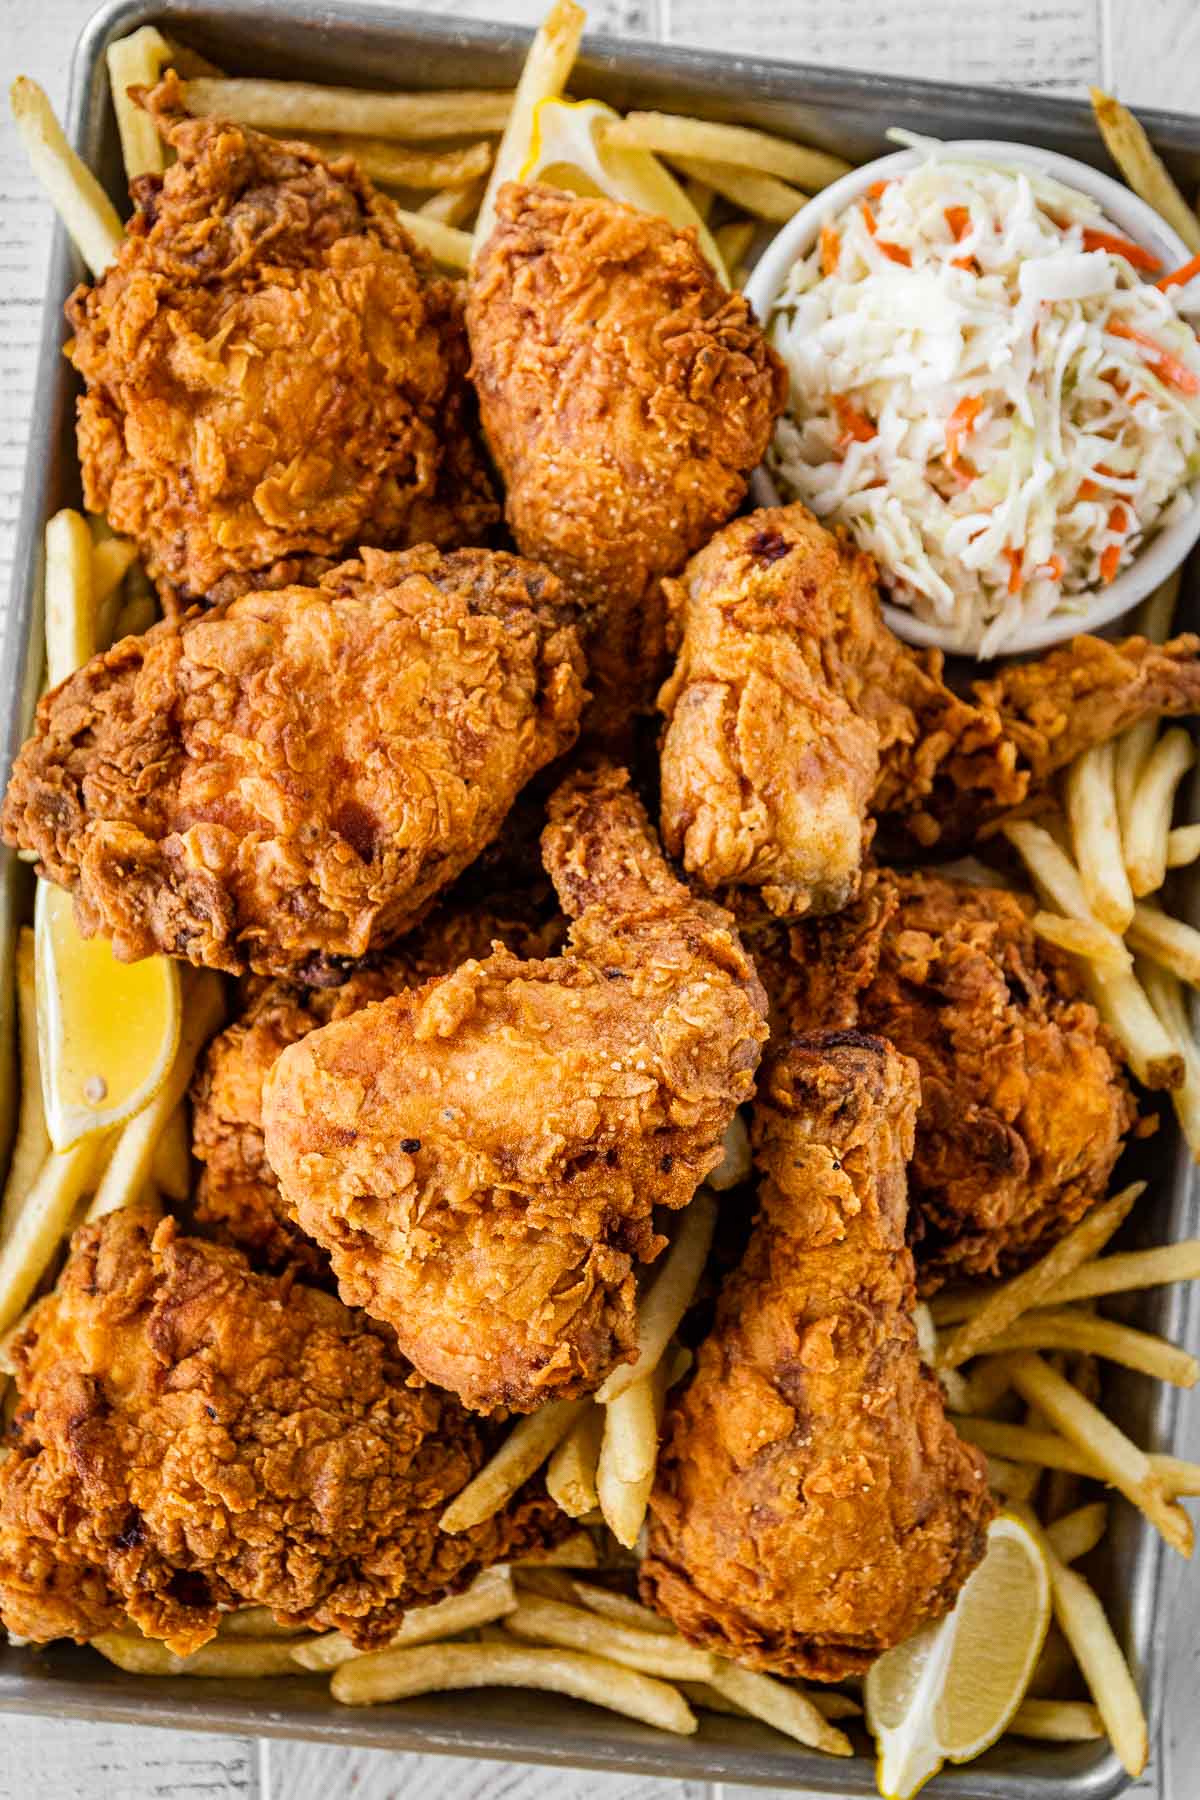 Super Crispy Fried Chicken with french fries and coleslaw